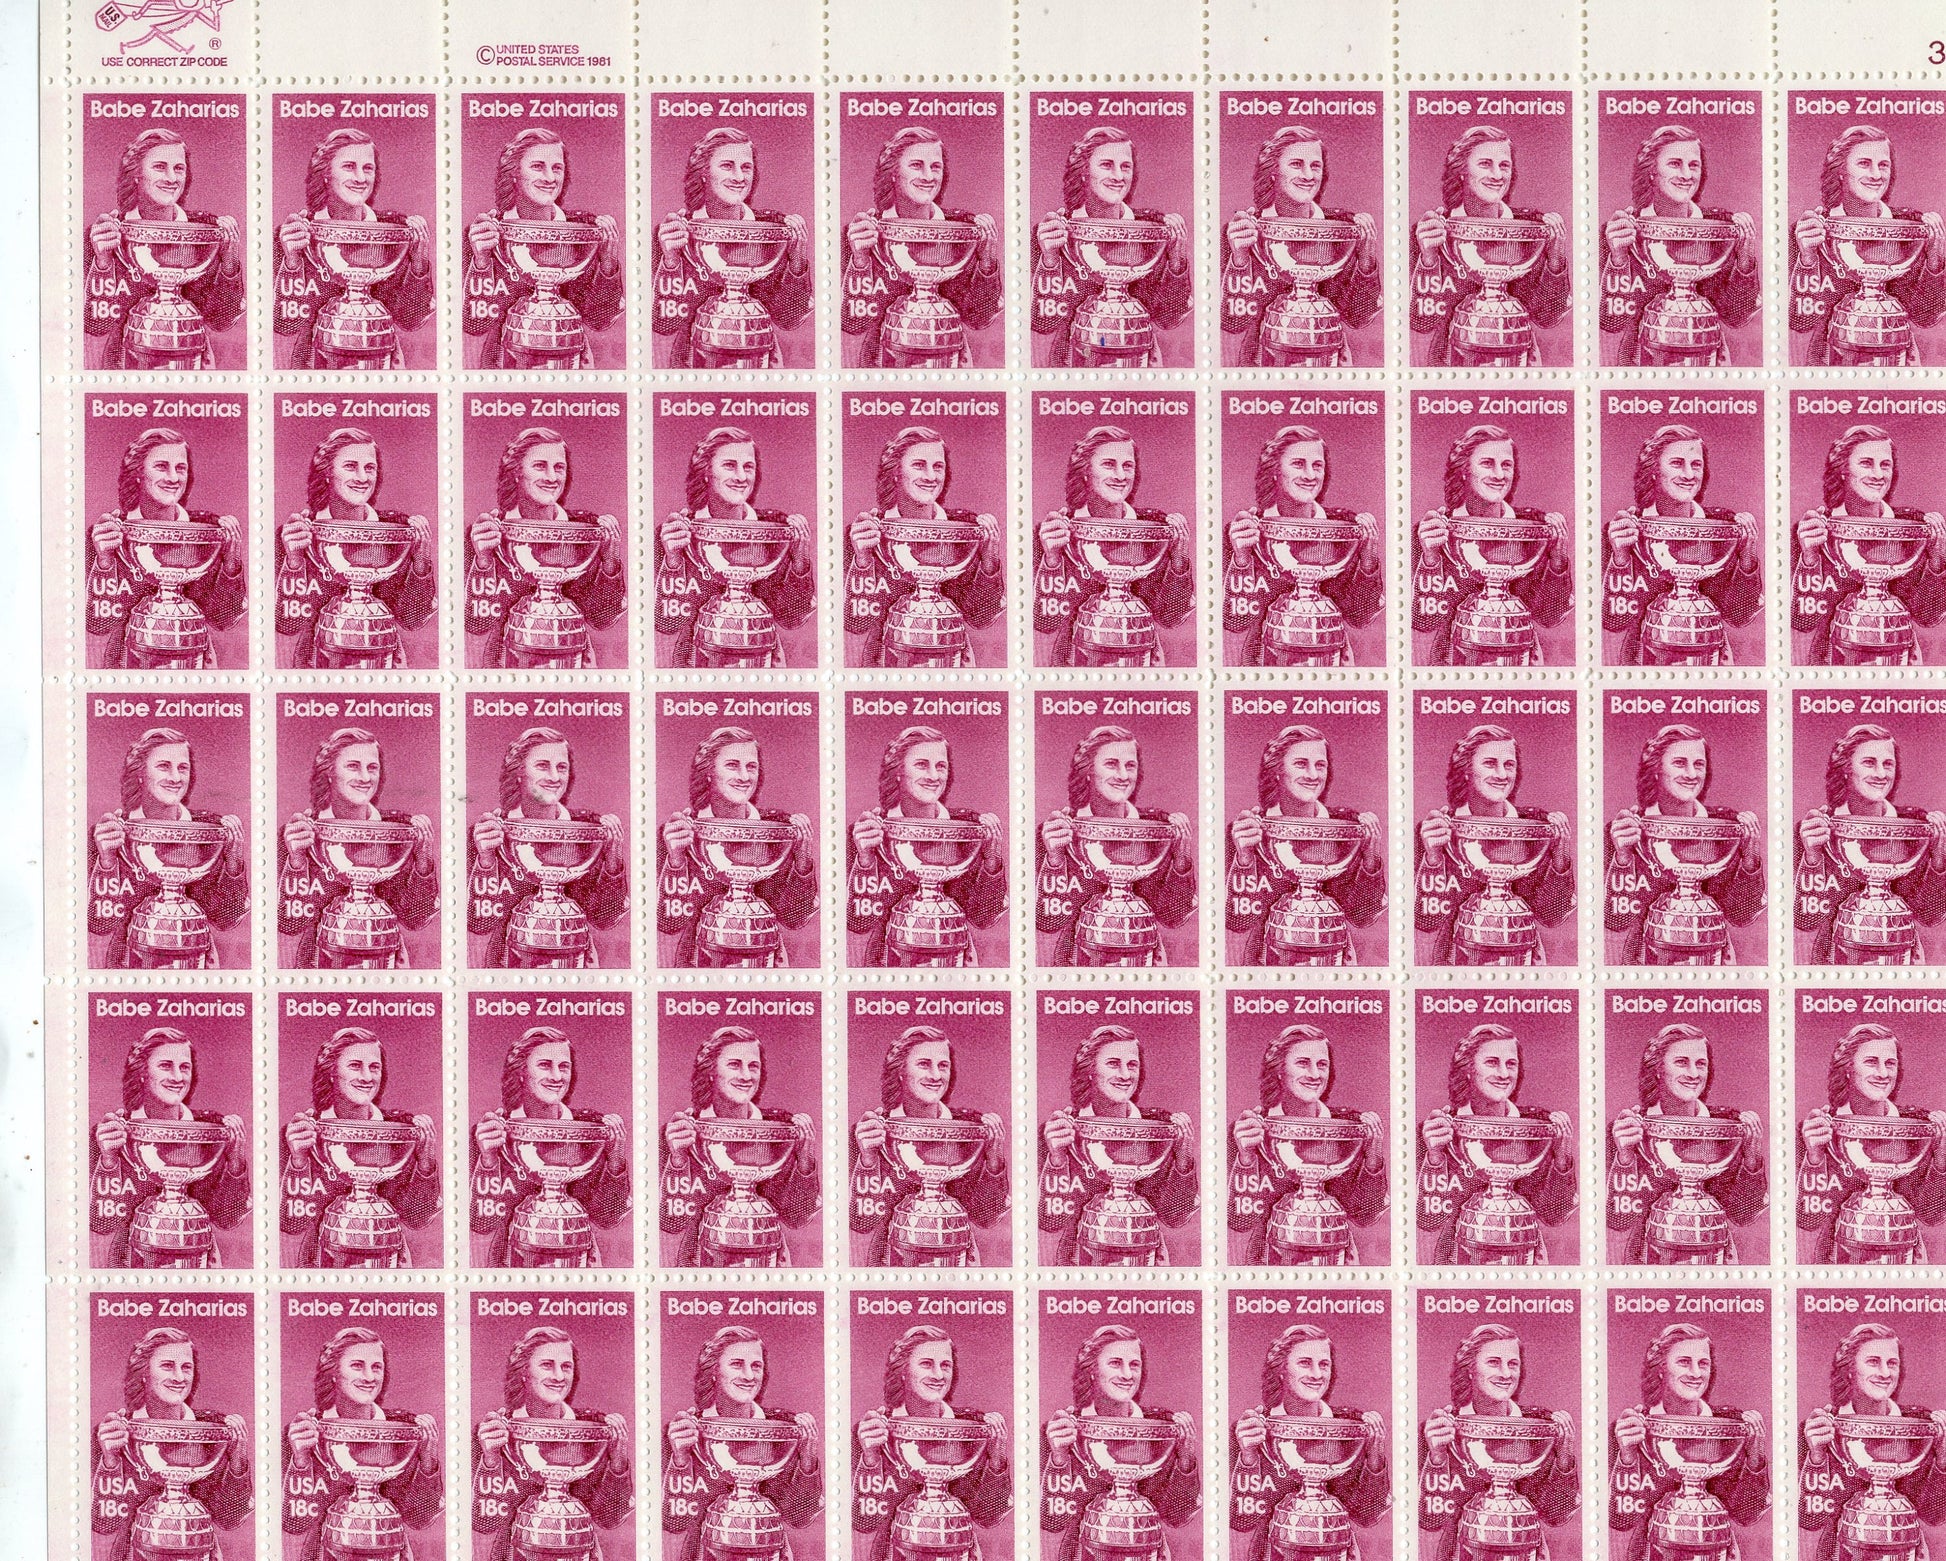 BABE ZAHARIAS GREATEST Women Athlete of her time Sheet of 50 18c Stamps - Greatest Amateur Ever - Issued in 1981 -